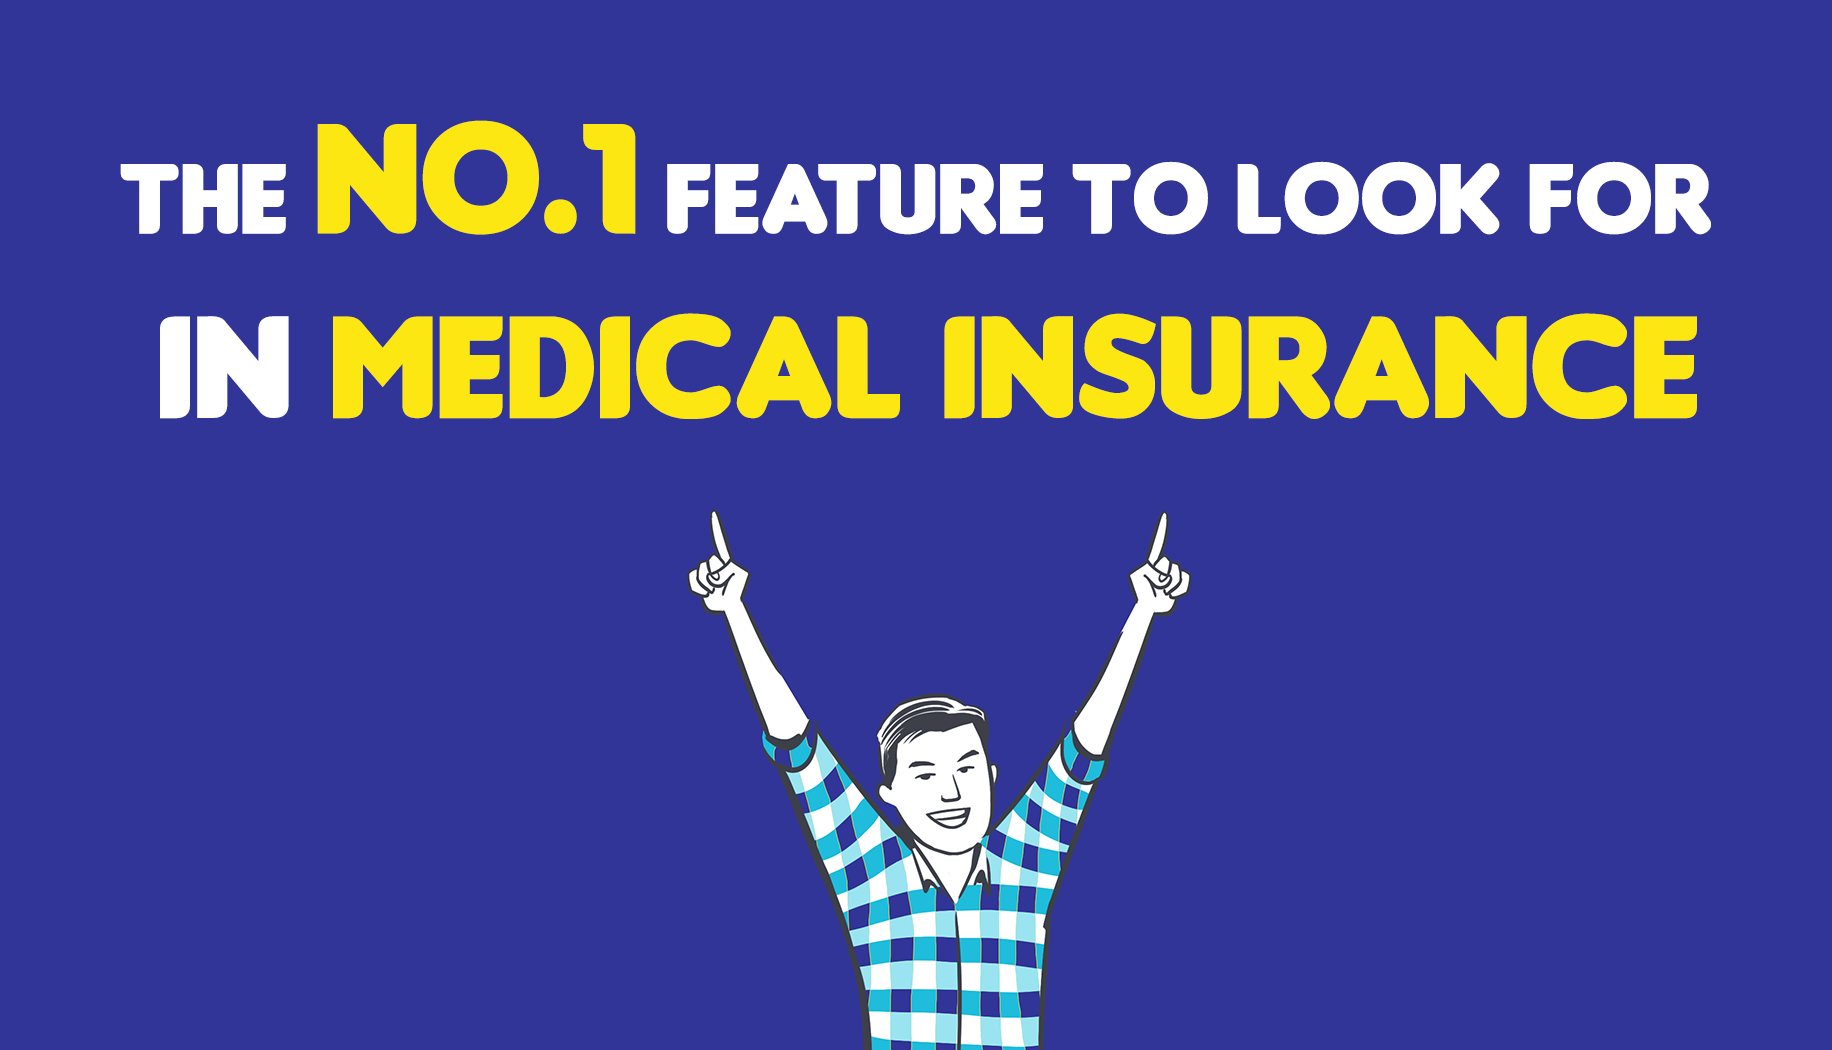 The Number 1 Feature to Look For In Medical Insurance